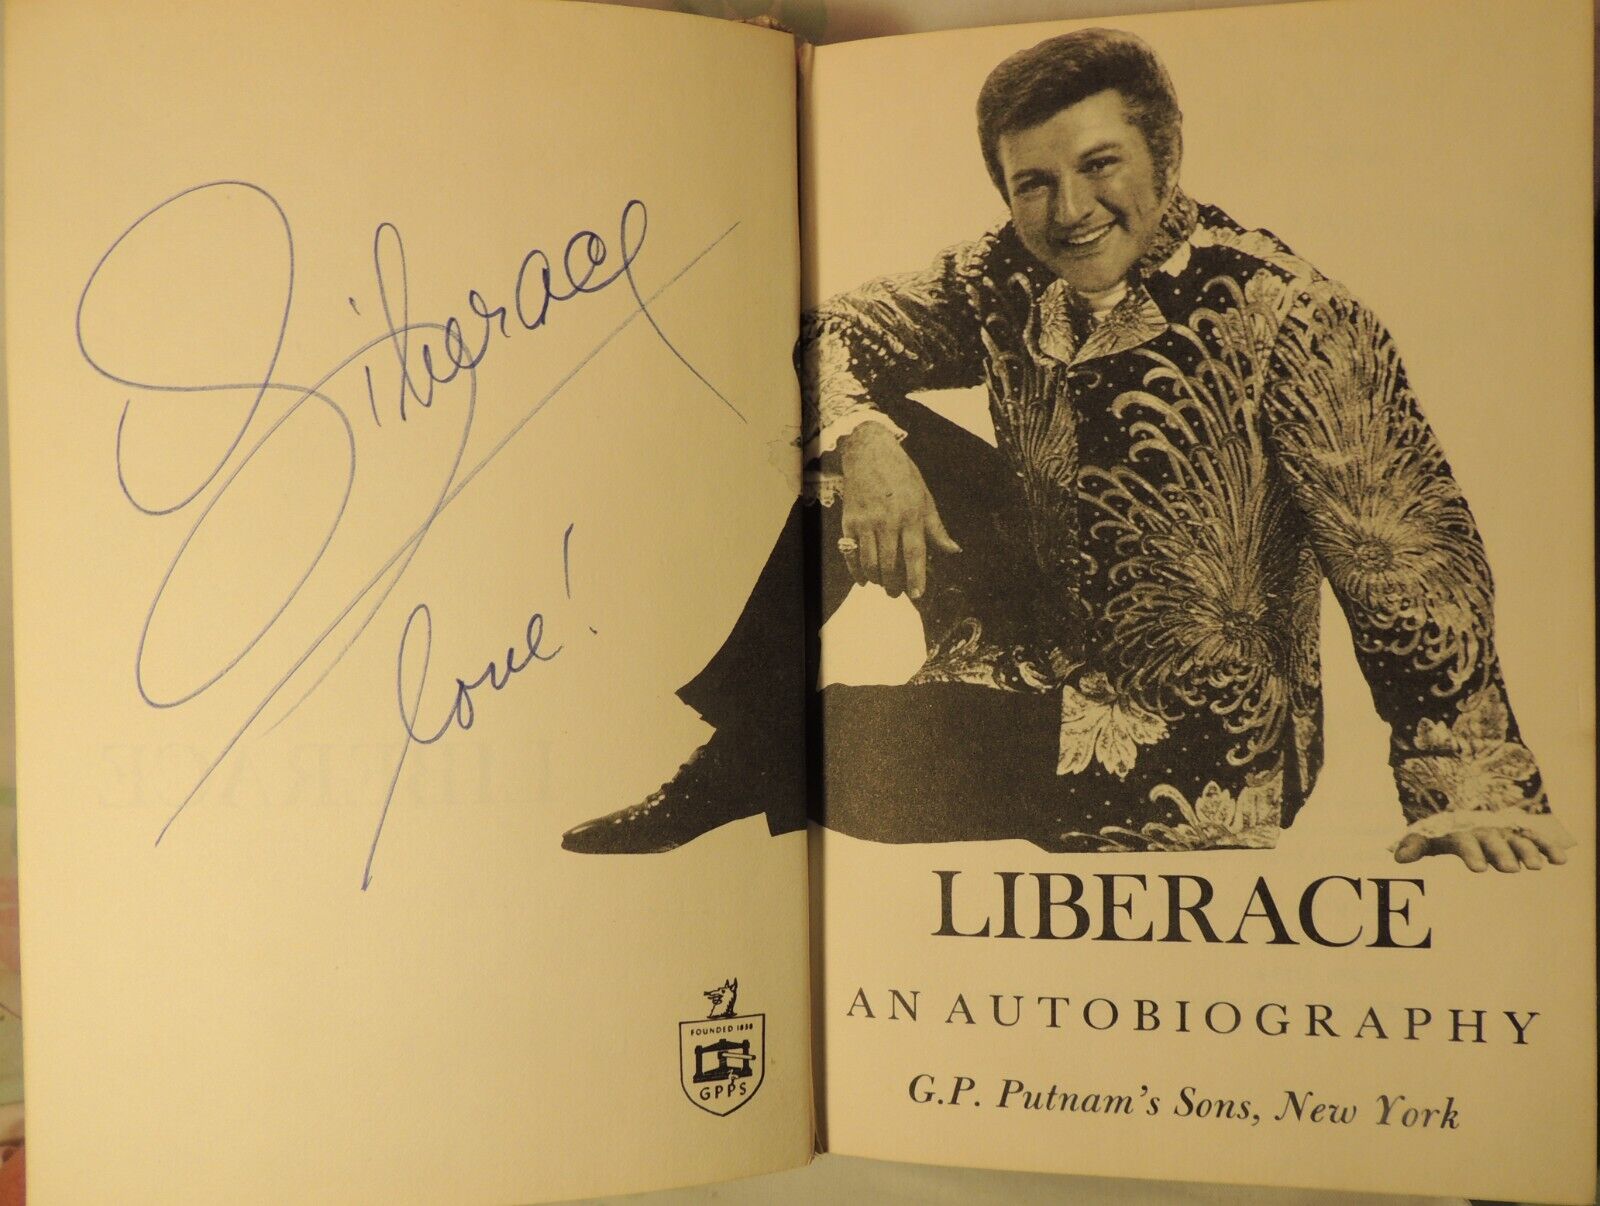 Autographed Book Liberace An Autobiography collectibles and Lawrence Welk items